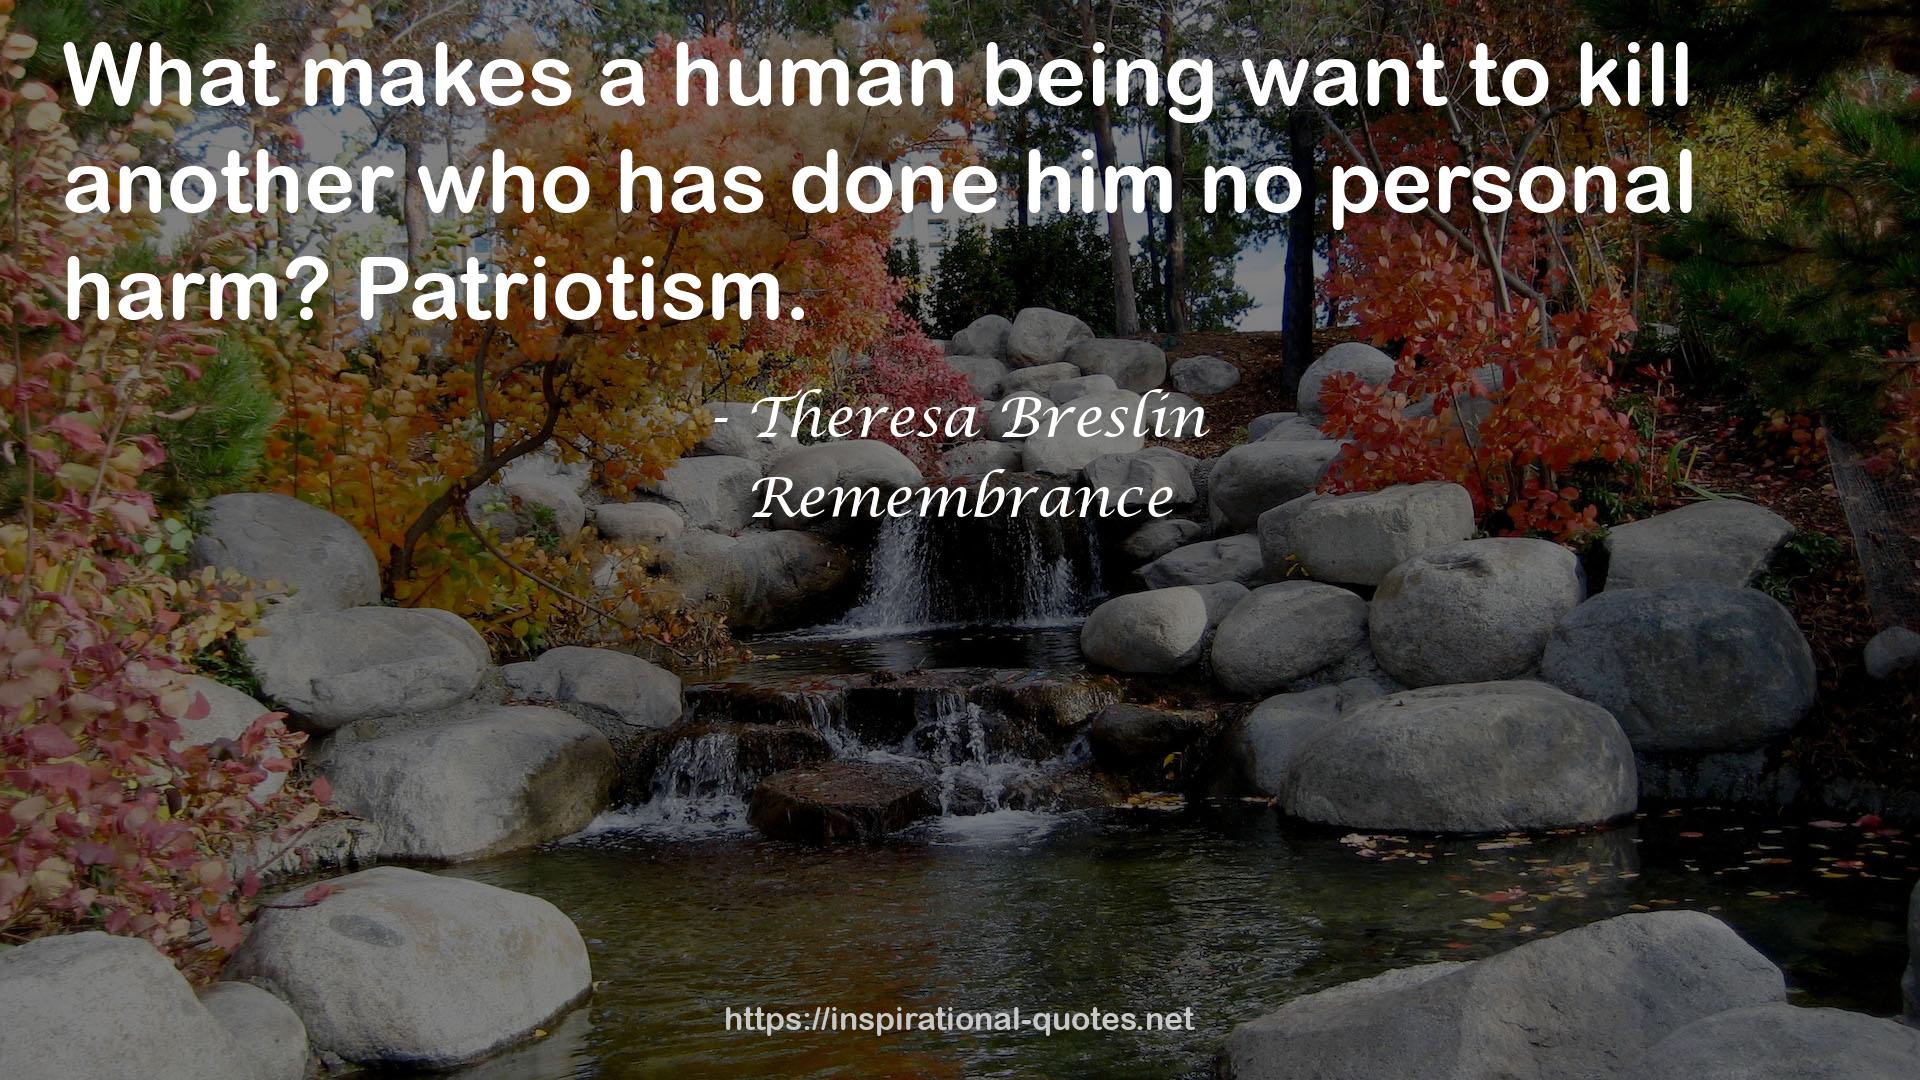 Theresa Breslin QUOTES